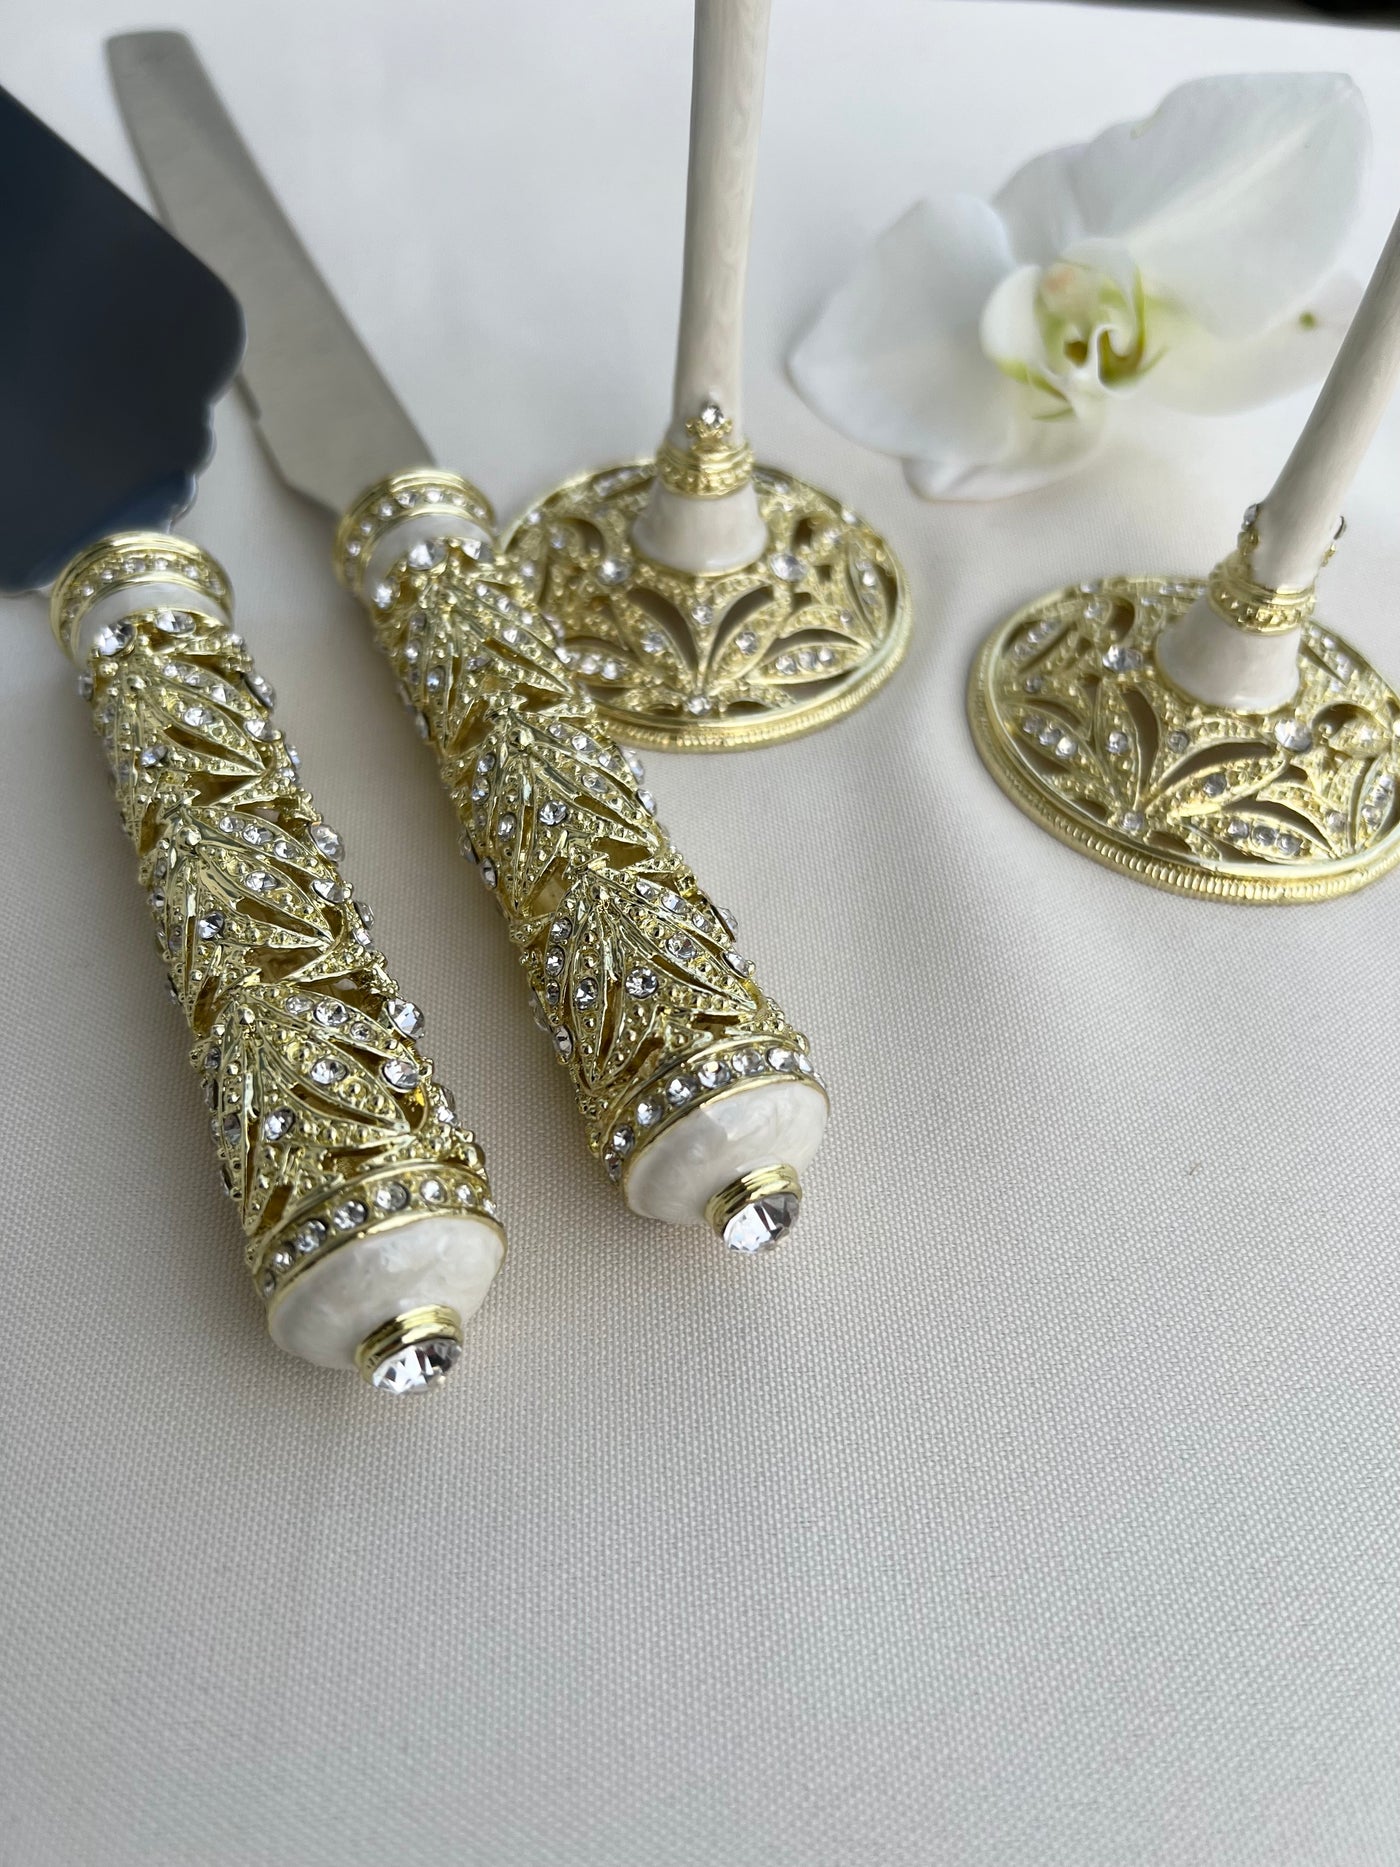 Bridal Cake Cutter & Toasting Champagne Flutes with Rhinestones & Crystals by Lucky Collections ™